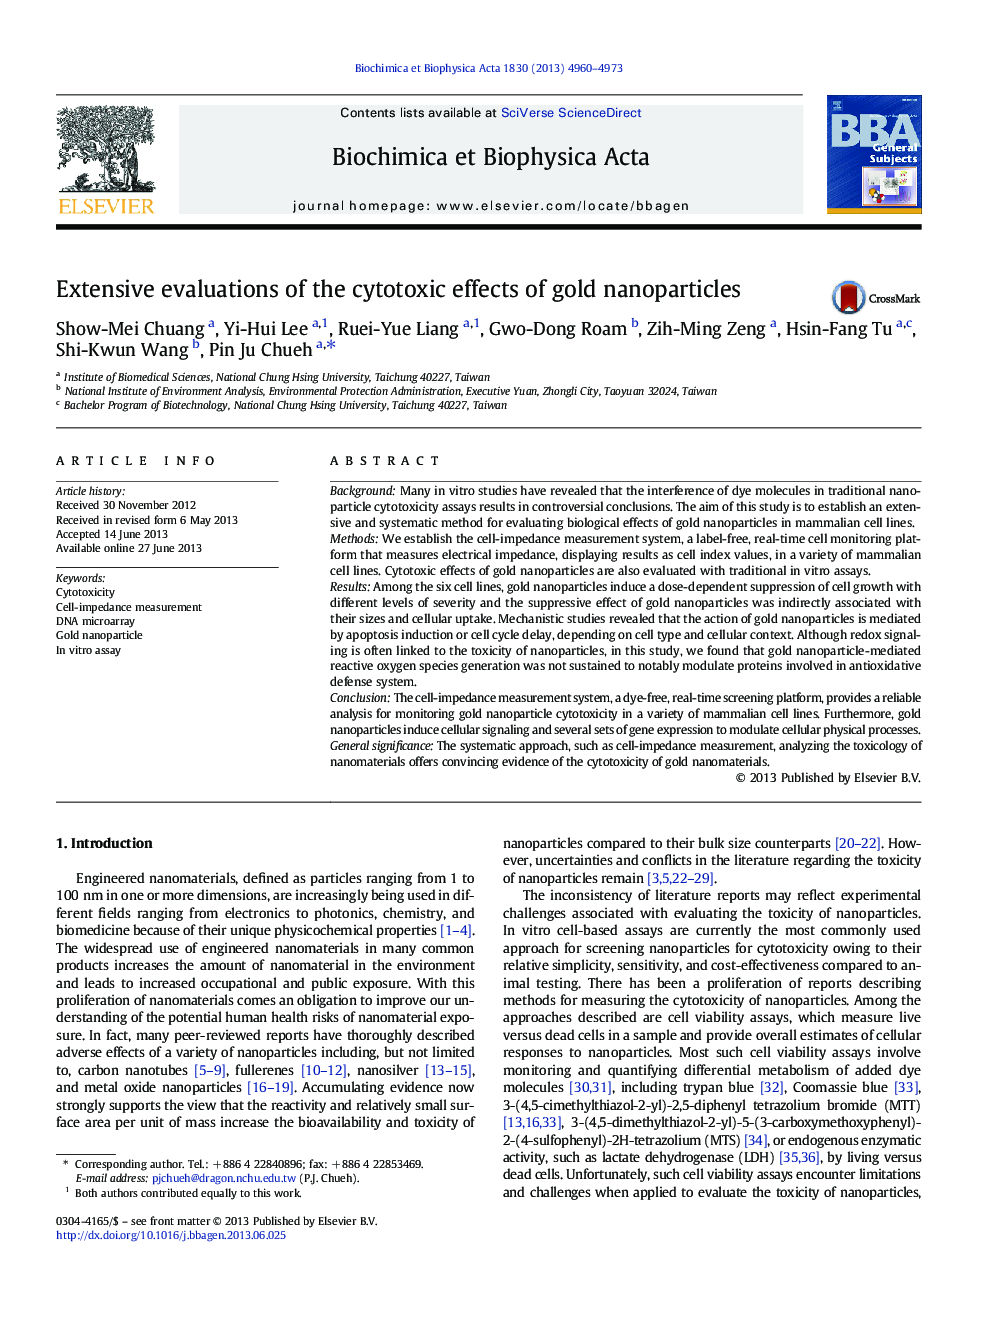 Extensive evaluations of the cytotoxic effects of gold nanoparticles